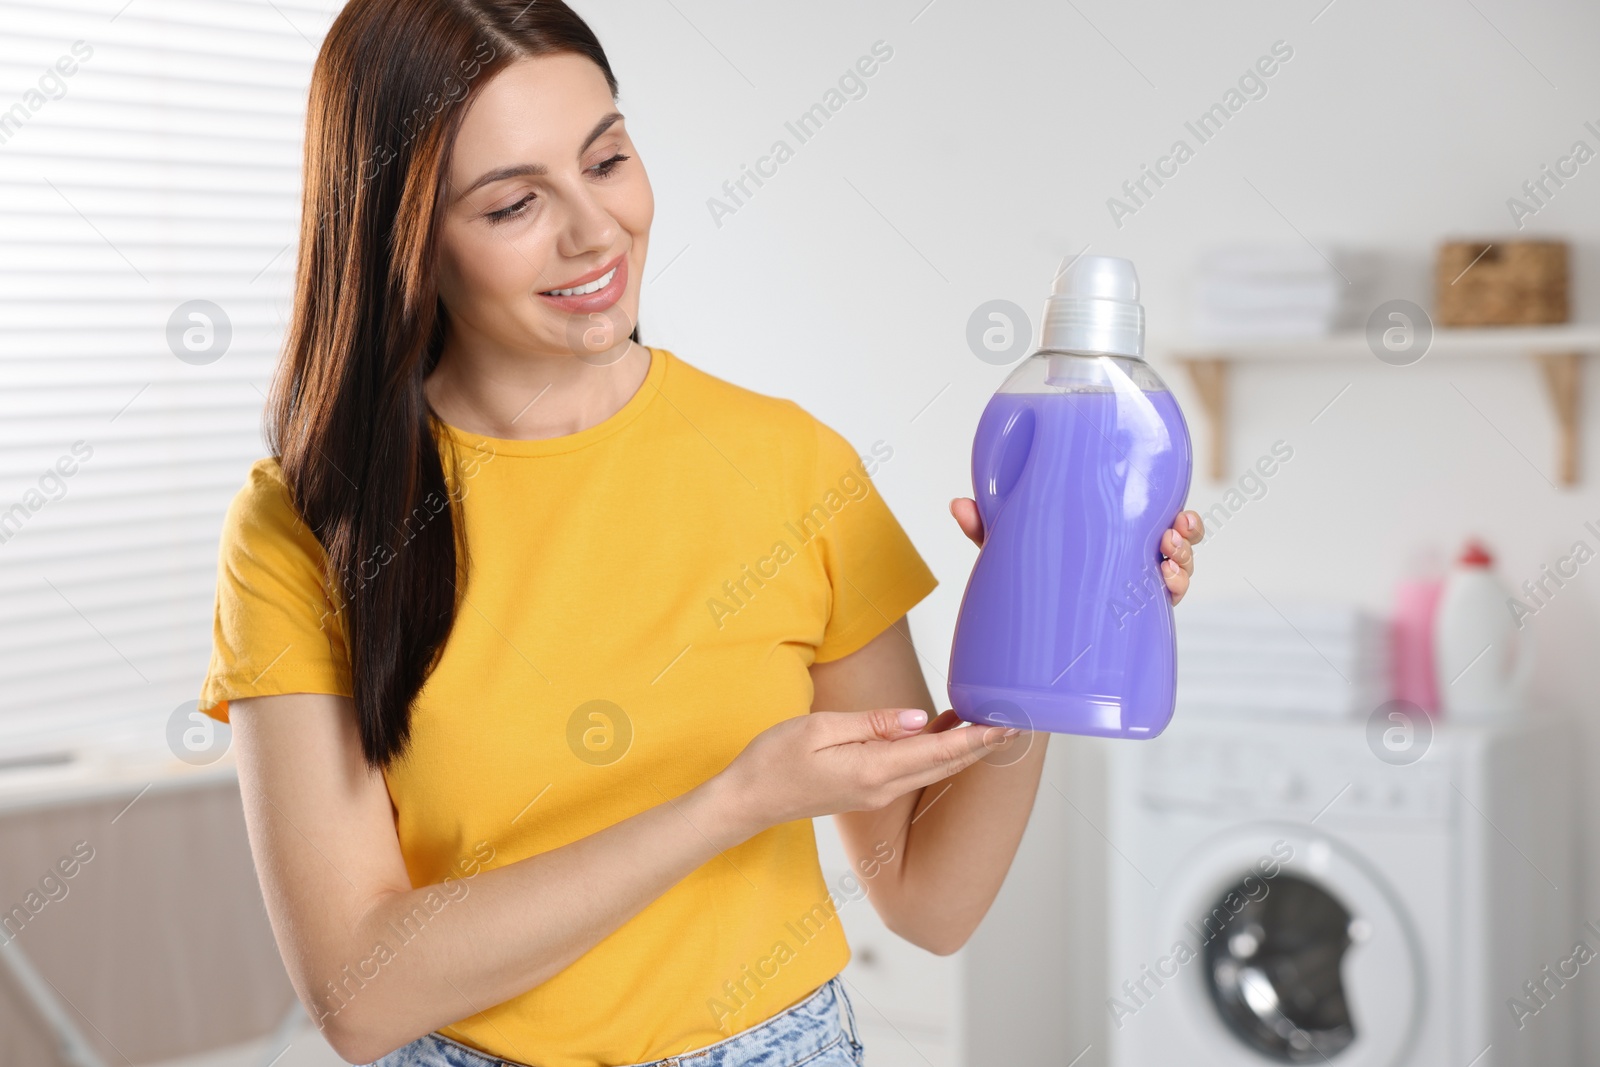 Photo of Beautiful woman showing fabric softener in bathroom